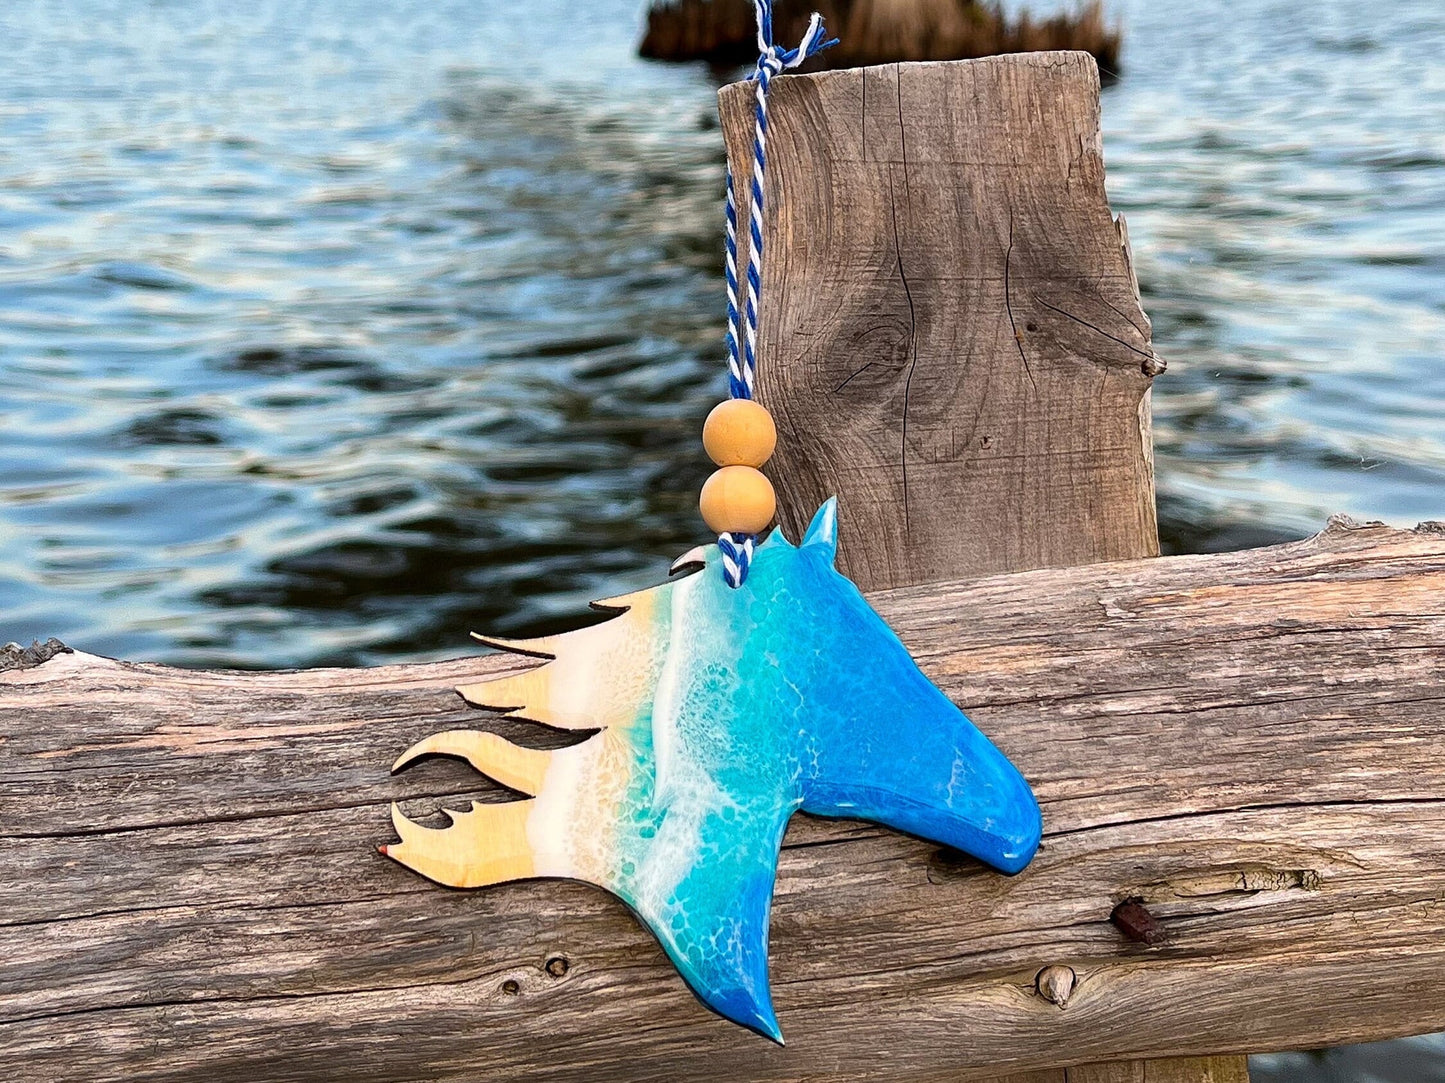 Wood Christmas ornament in the shape of a Horse head with flowing mane. Decorated with blue and teal ocean resin art resembling the waves along the Outer Banks of North Carolina. Finished with blue and white bakers twine and two wooden beads.